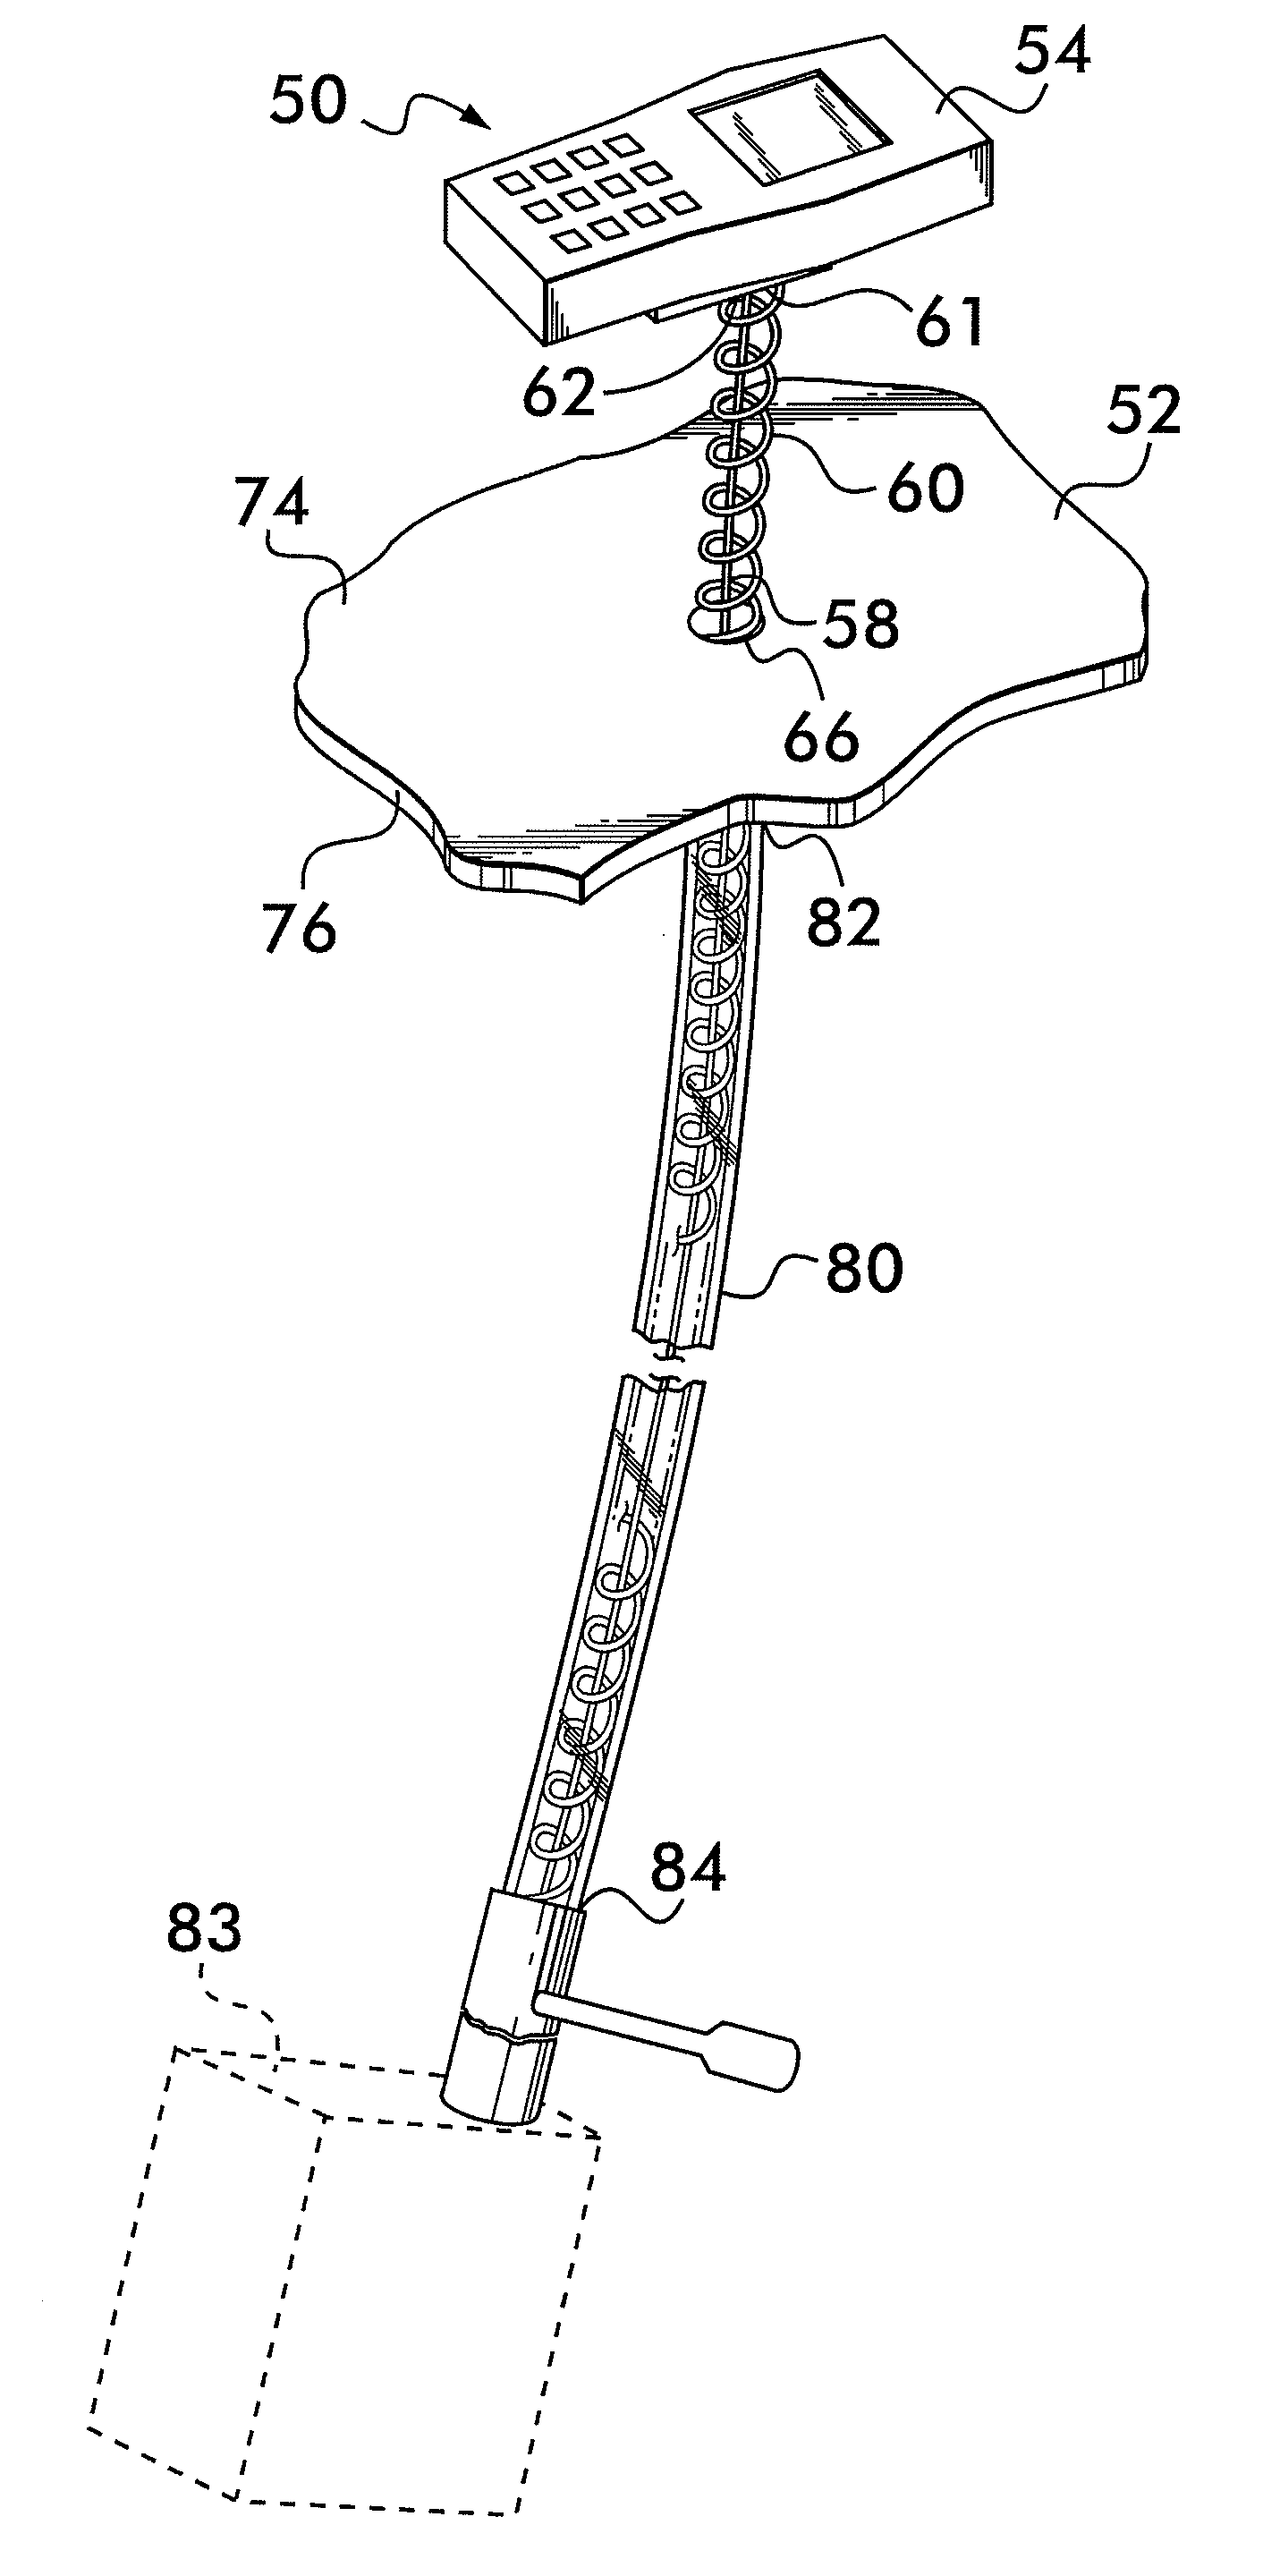 Coiled cable display device